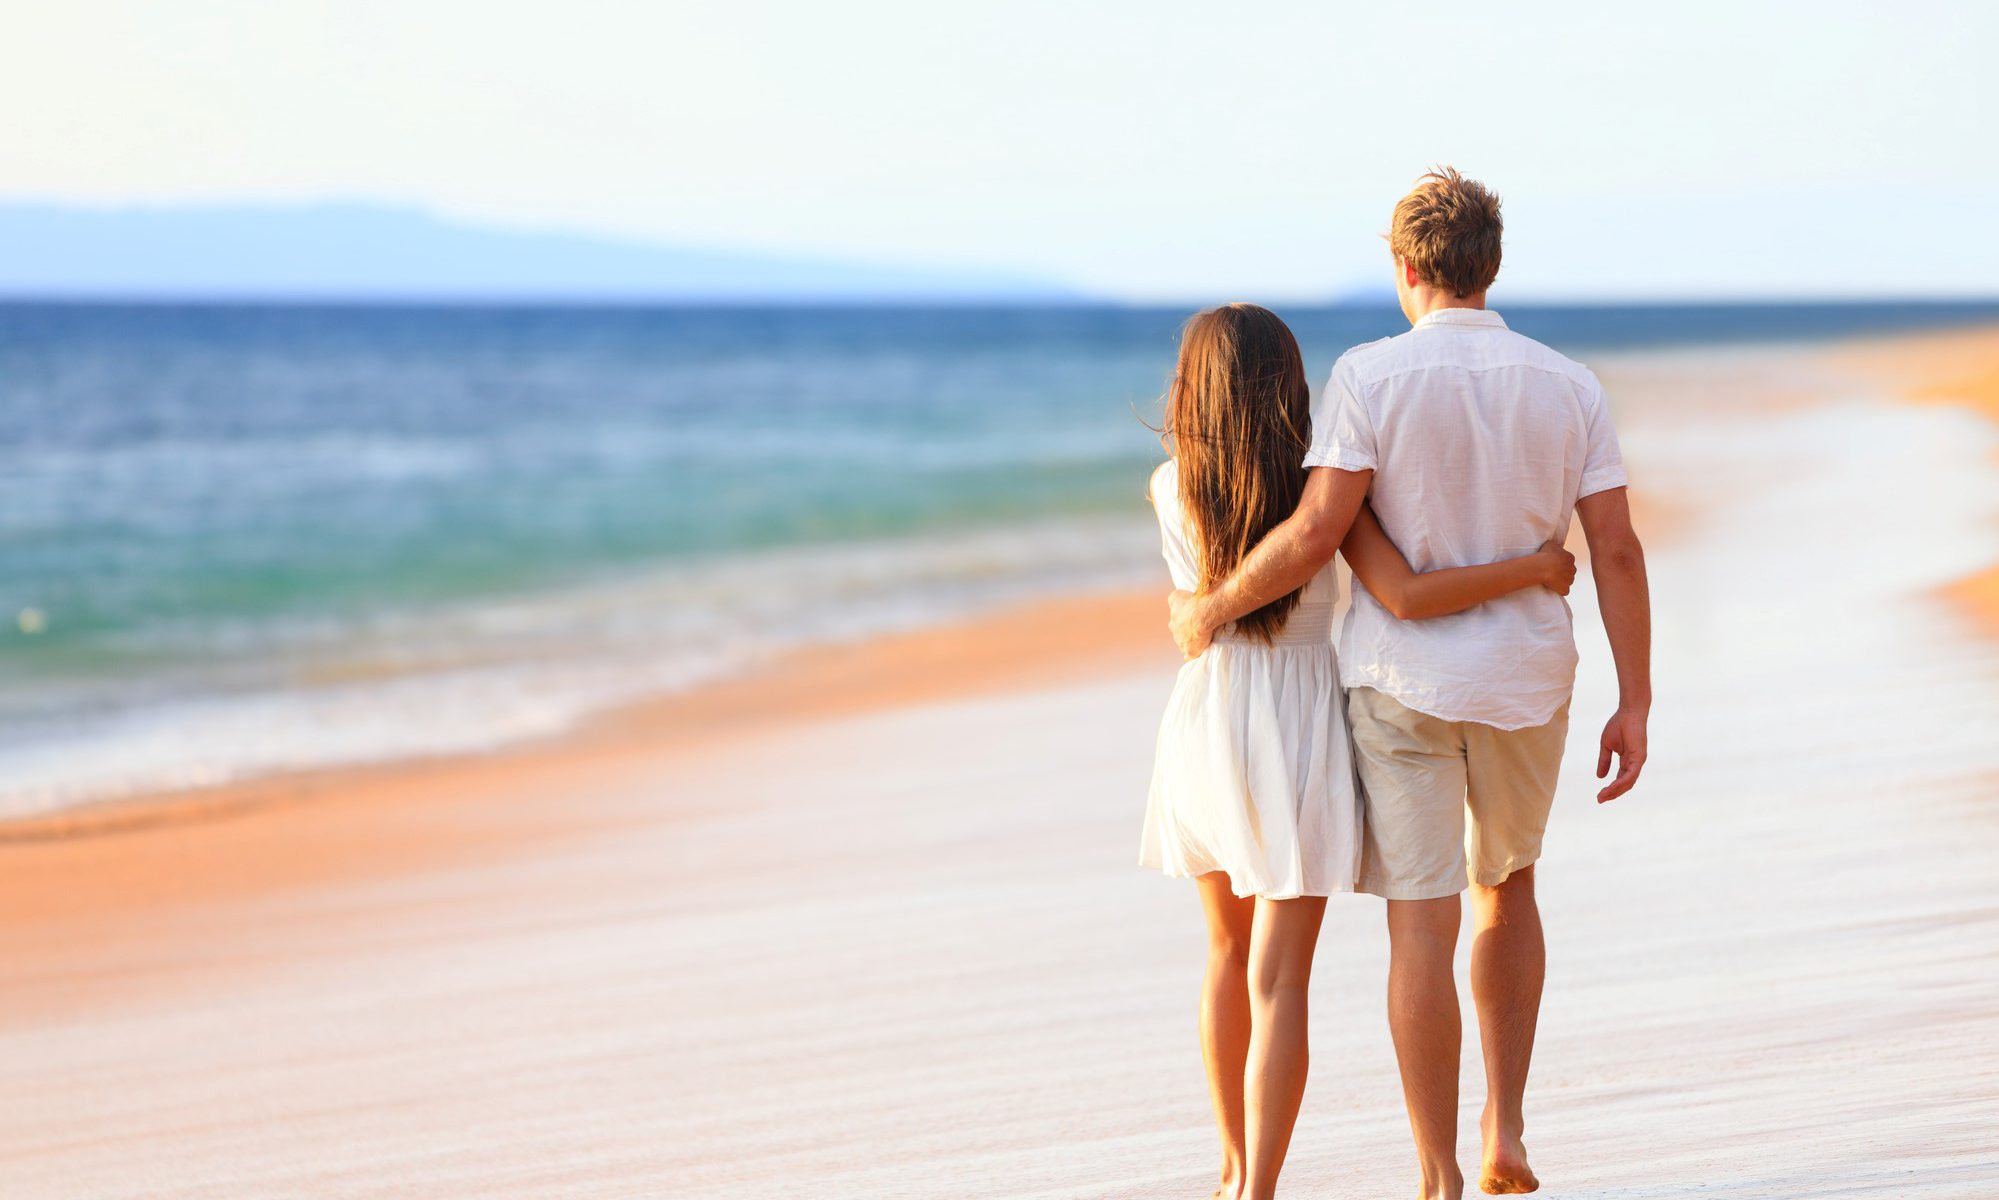 Private Island Getaways For Couples - Escape To Paradise With Your Loved One